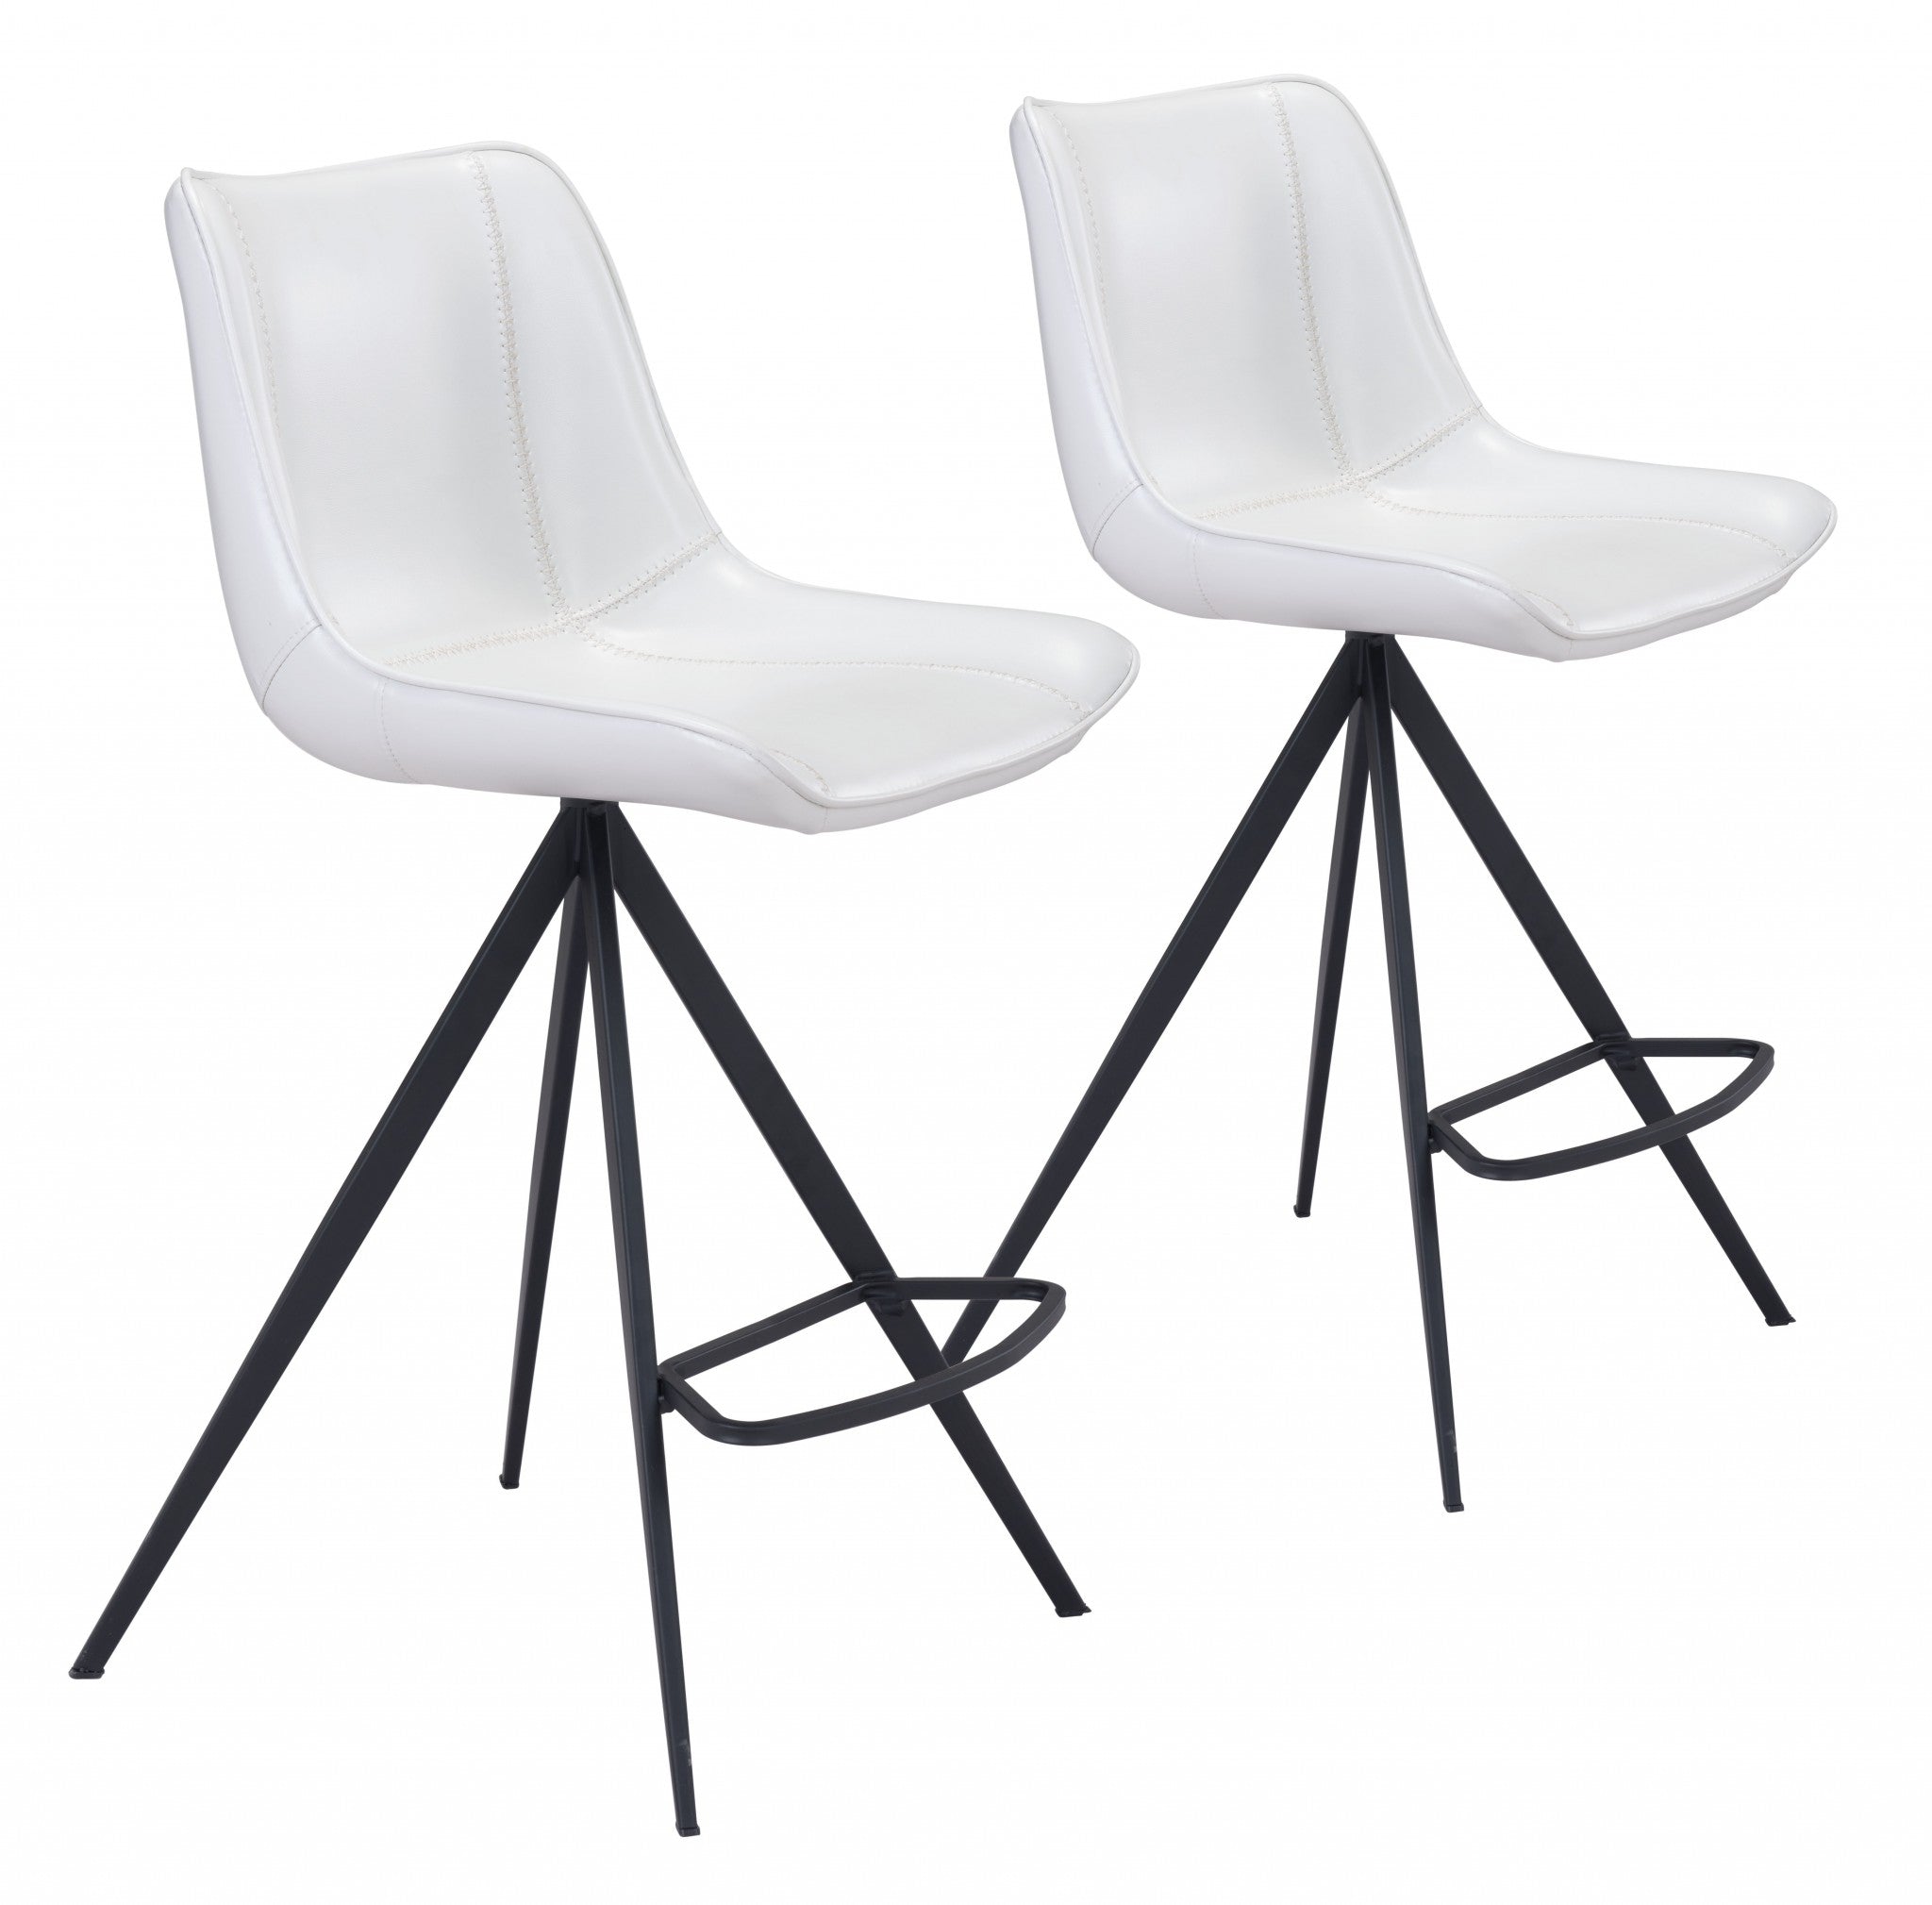 Set of Two 26" White And Black Steel Low Back Counter Height Bar Chairs